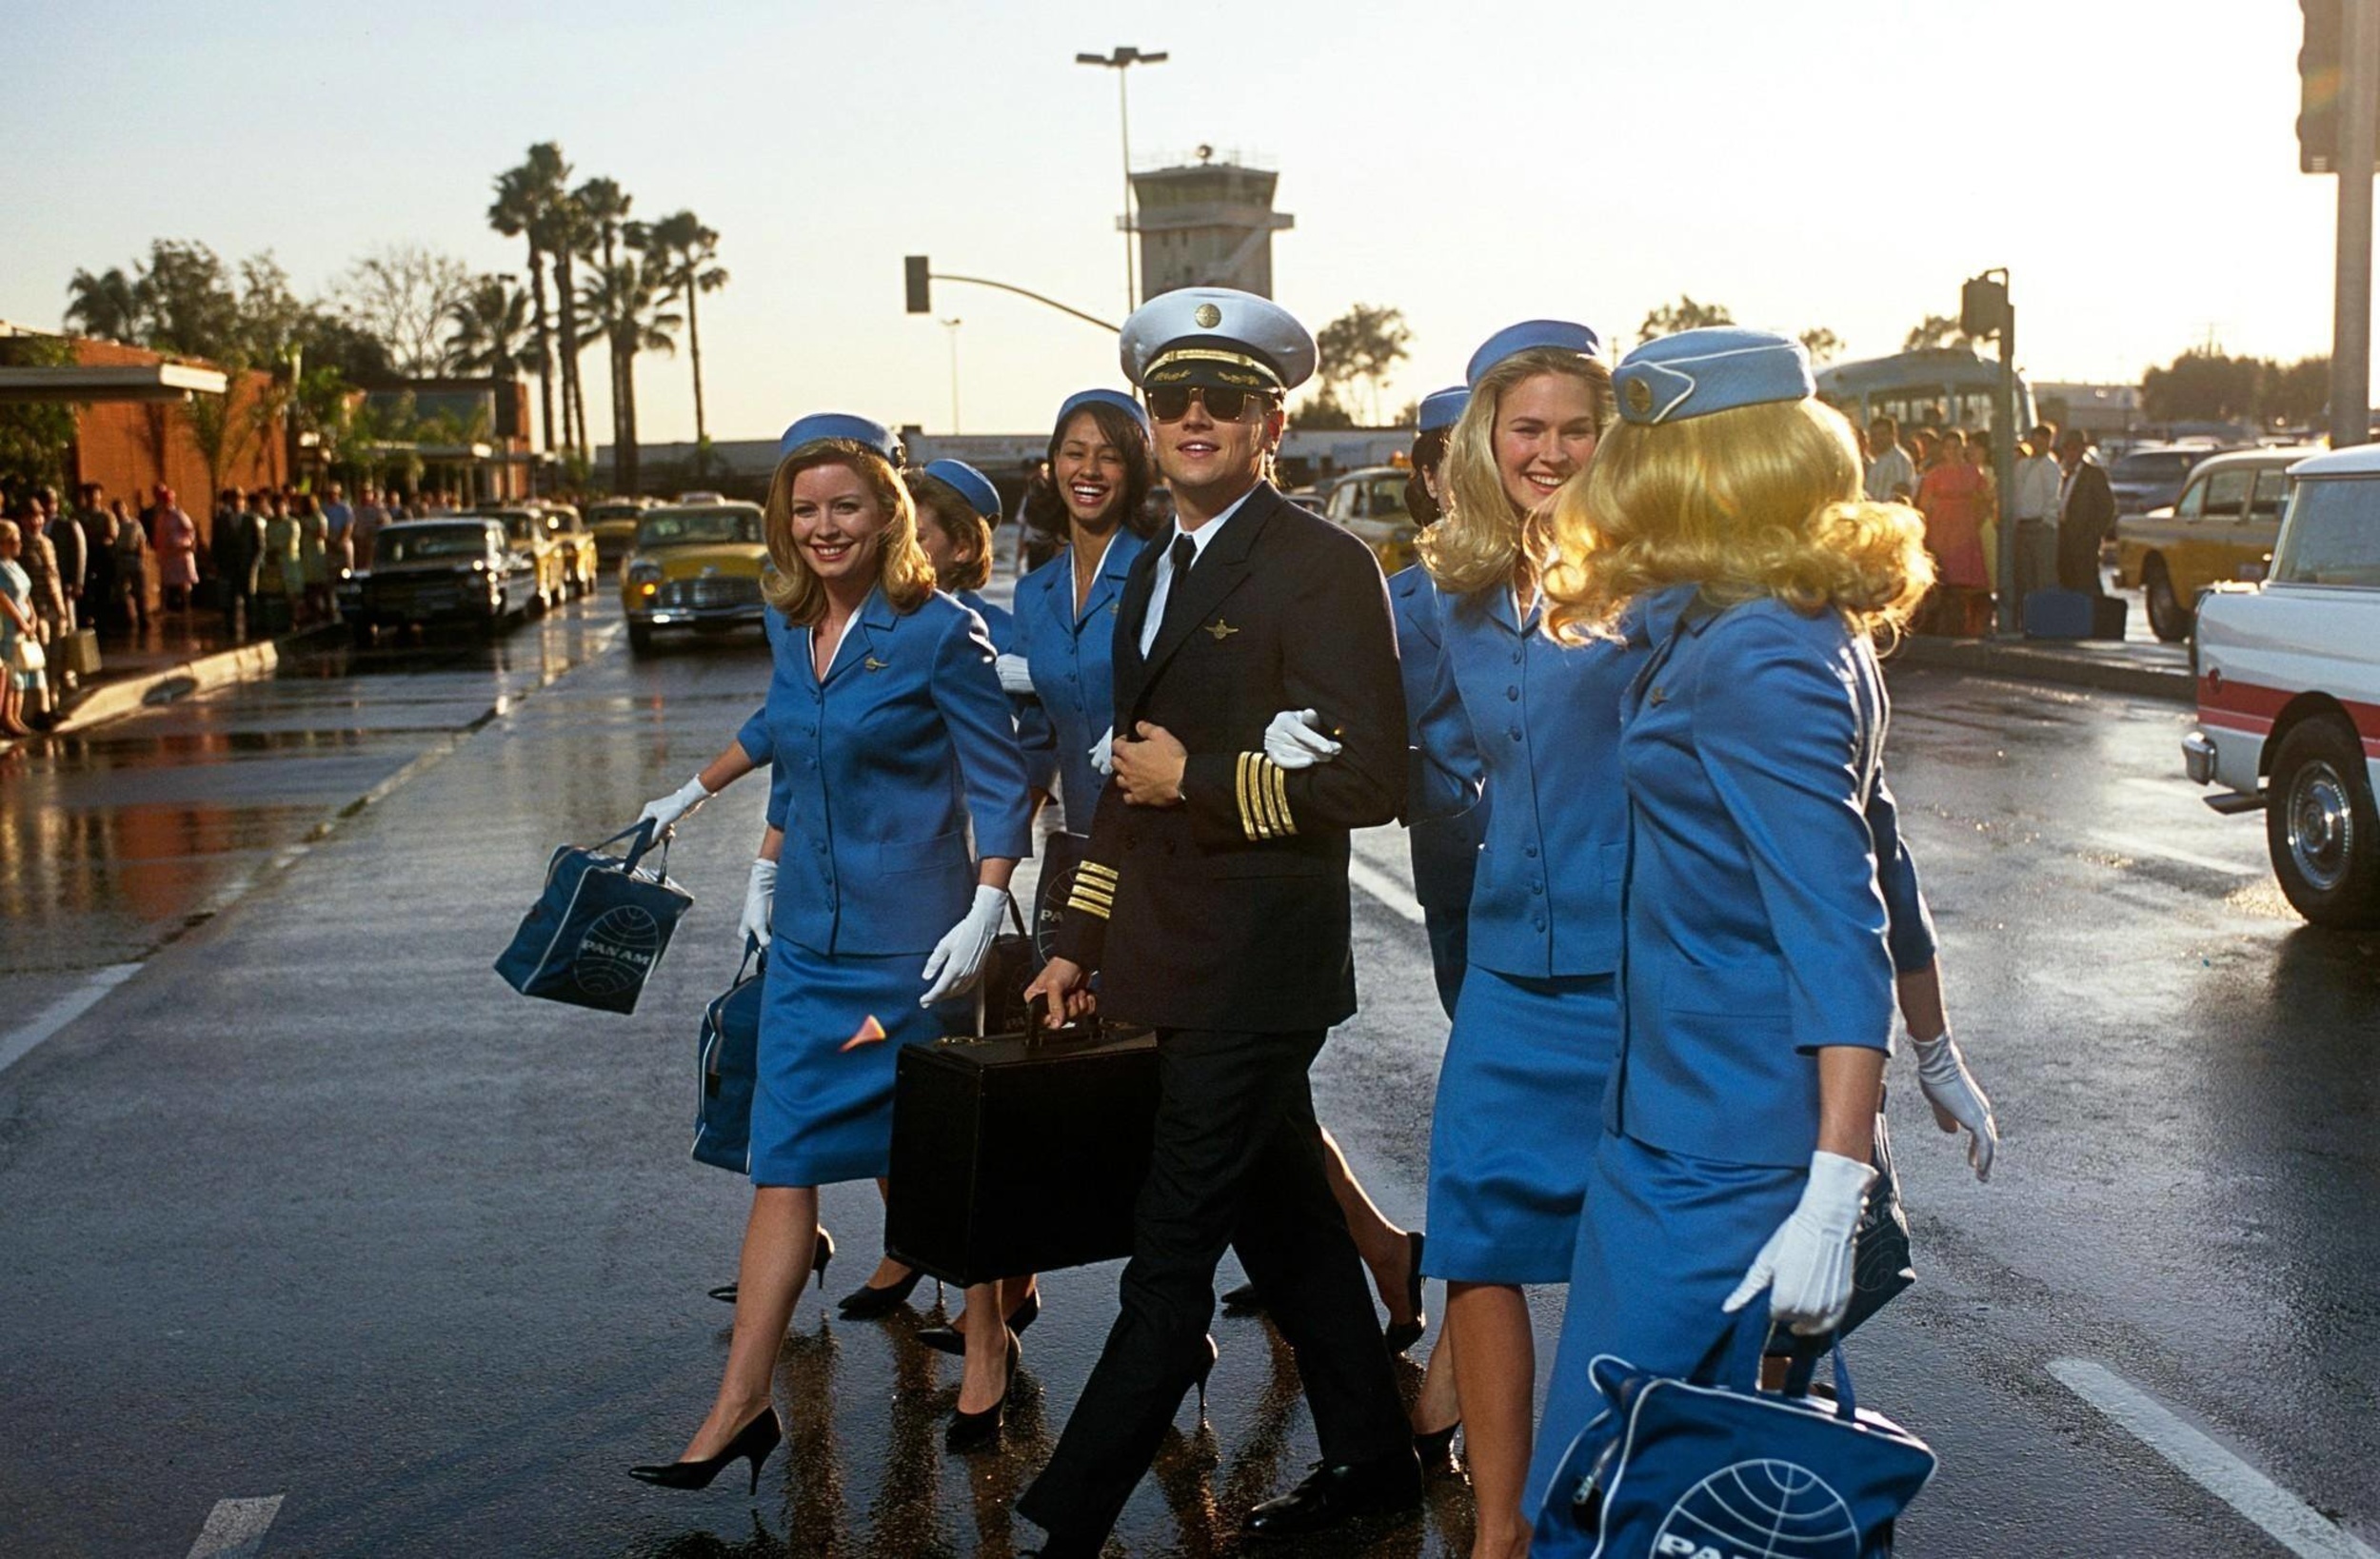 <p>Frank Abagnale Jr. conned and swindled his way into doing a few things in life. He pretended to be a lawyer and a doctor, but he also swindled his way into being a pilot for Pan Am, though obviously, he doesn’t know how to fly planes. He’s mostly in it for the perks and the cash, as he eventually turns the Pan Am payroll checks he has his hands on into millions in ill-gotten gains. So maybe Frank isn’t a pilot, but a lot of people believed him. Why shouldn’t we?</p><p><a href='https://www.msn.com/en-us/community/channel/vid-cj9pqbr0vn9in2b6ddcd8sfgpfq6x6utp44fssrv6mc2gtybw0us'>Follow us on MSN to see more of our exclusive entertainment content.</a></p>